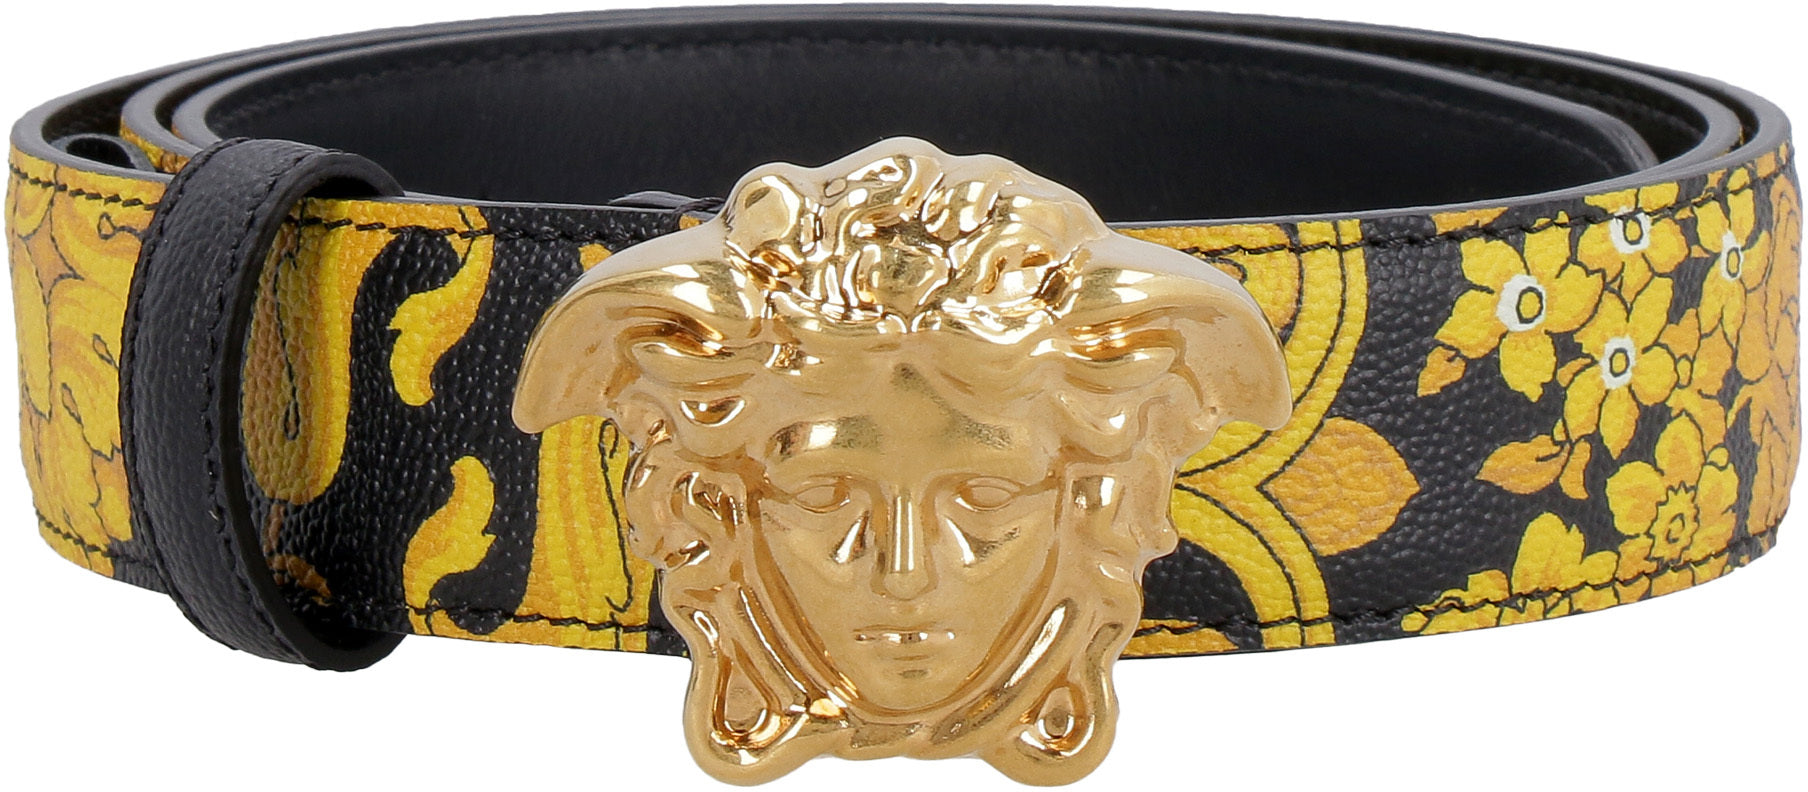 Leather belt with buckle-Versace-OUTLET-SALE-ARCHIVIST